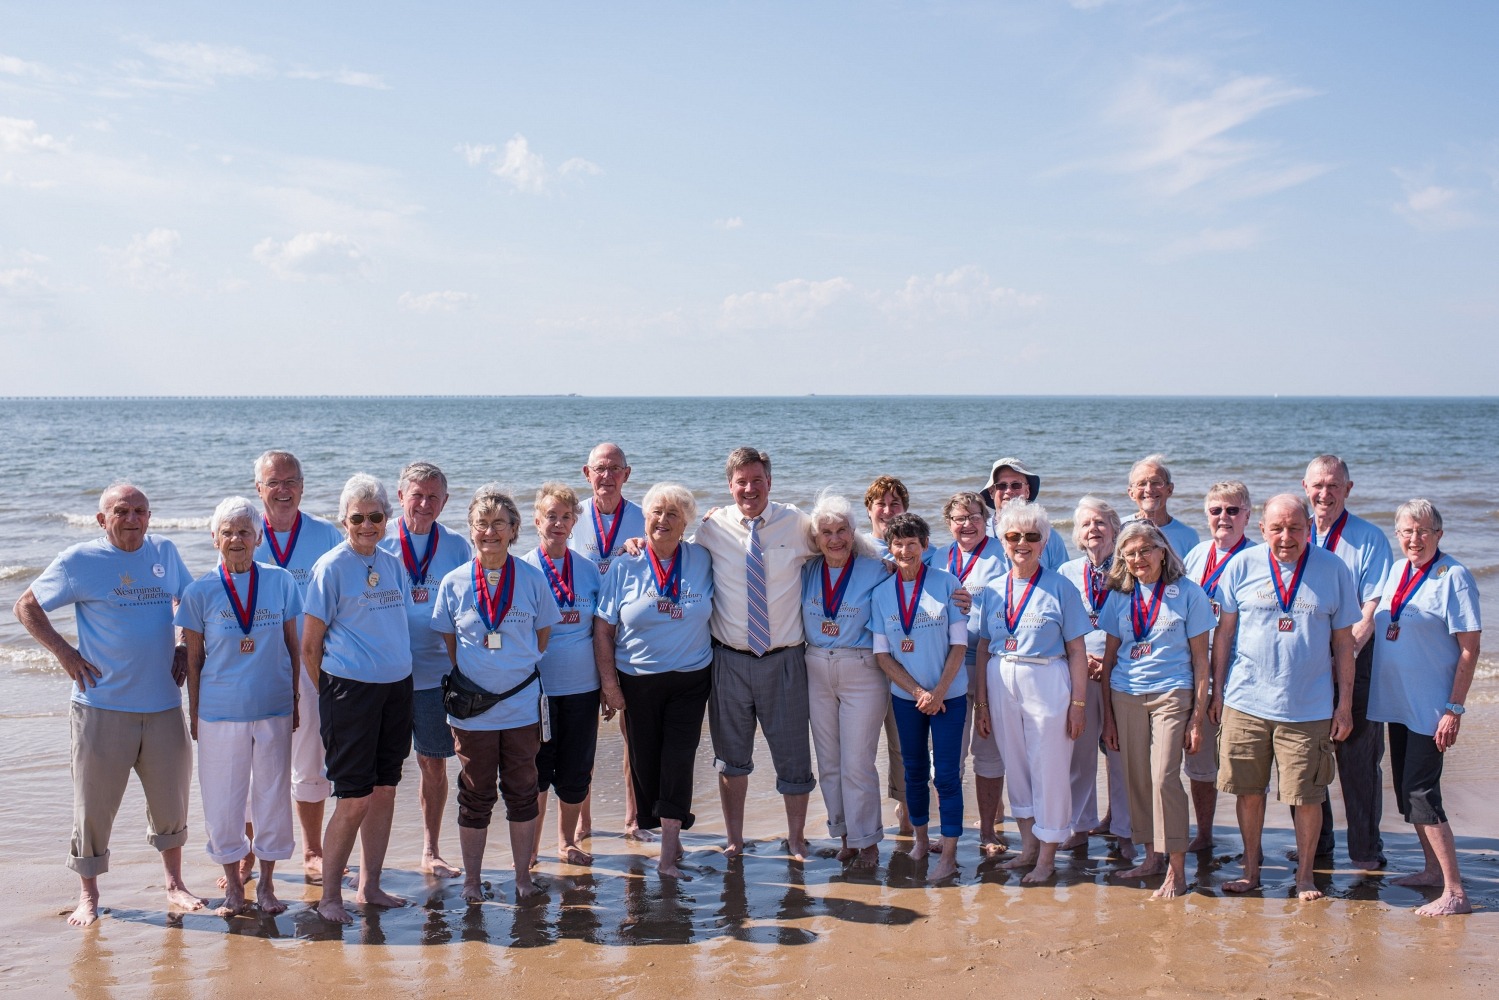 Large Group of Retired People Smiling on the Beach Shore